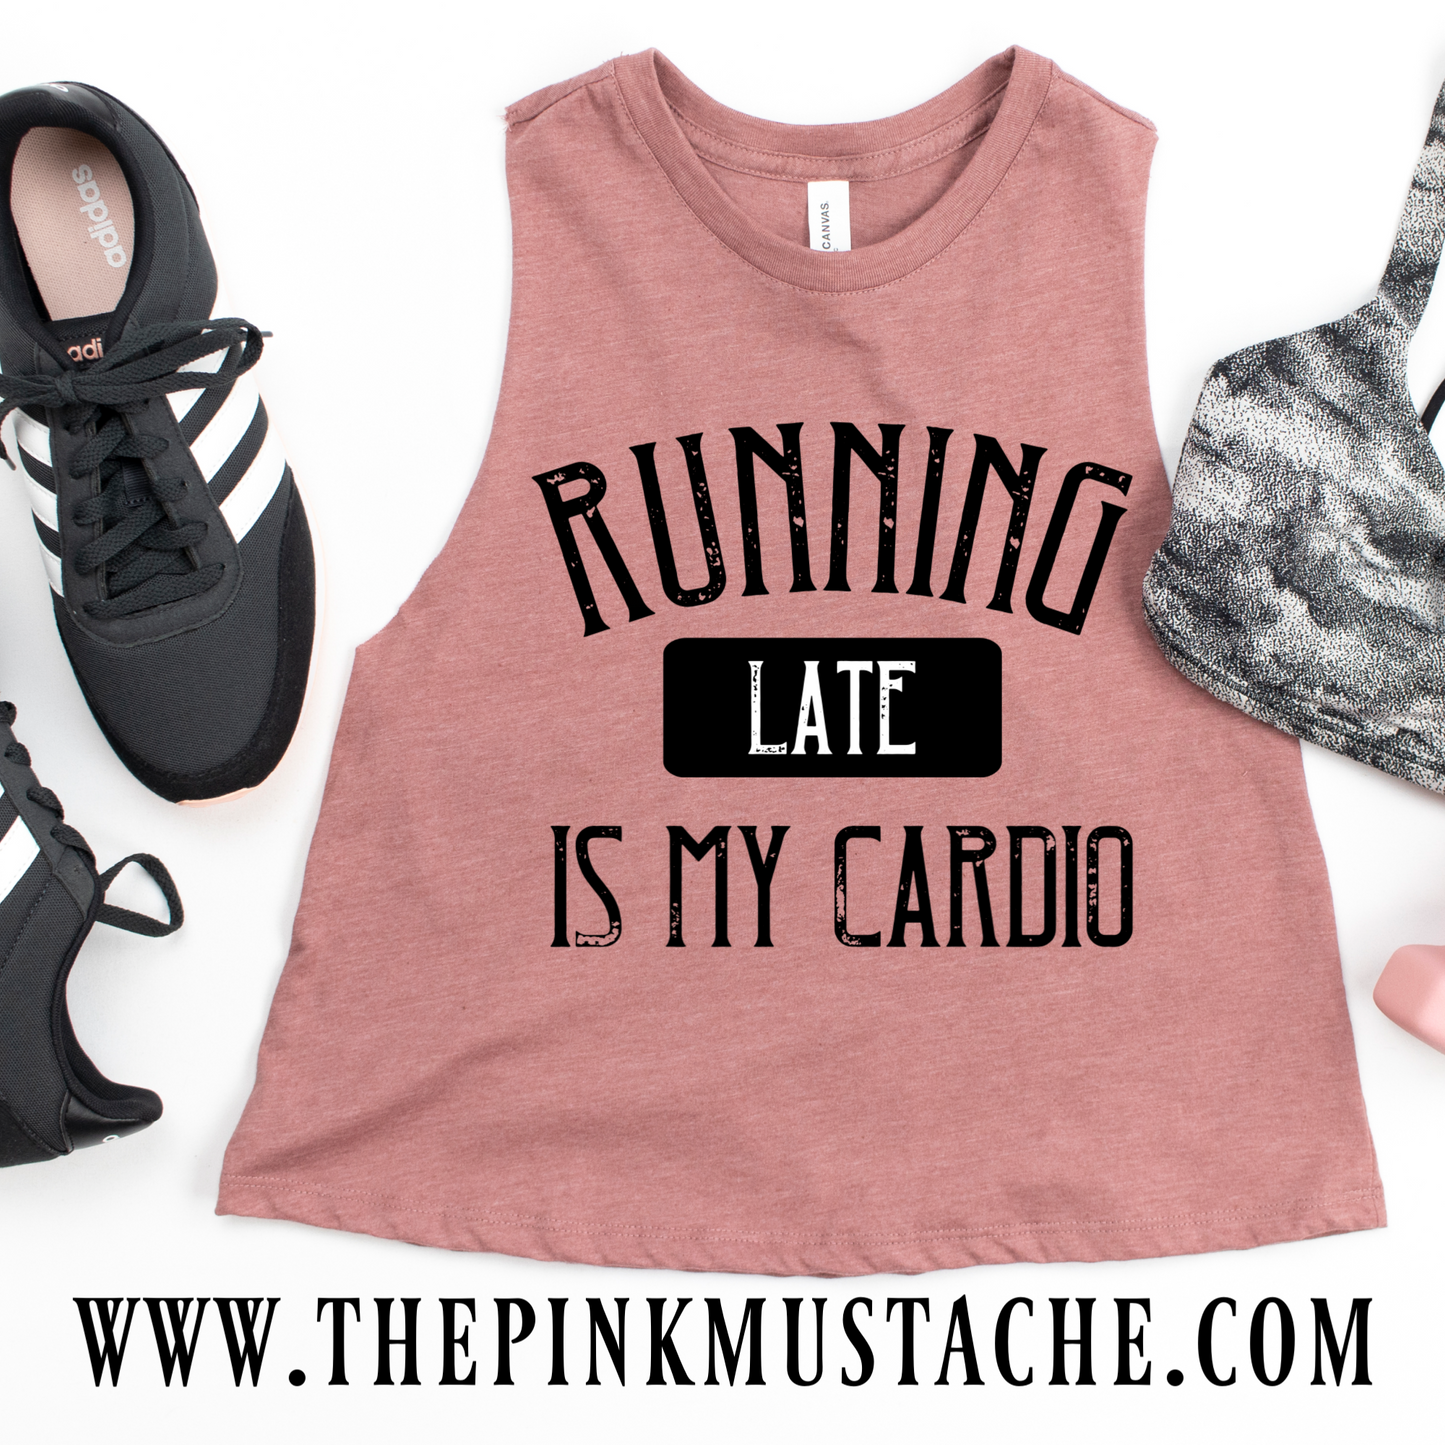 Running Late Is My Cardio - Funny Graphic Cropped Tank - Racerback Muscle Crop - Workout Tank